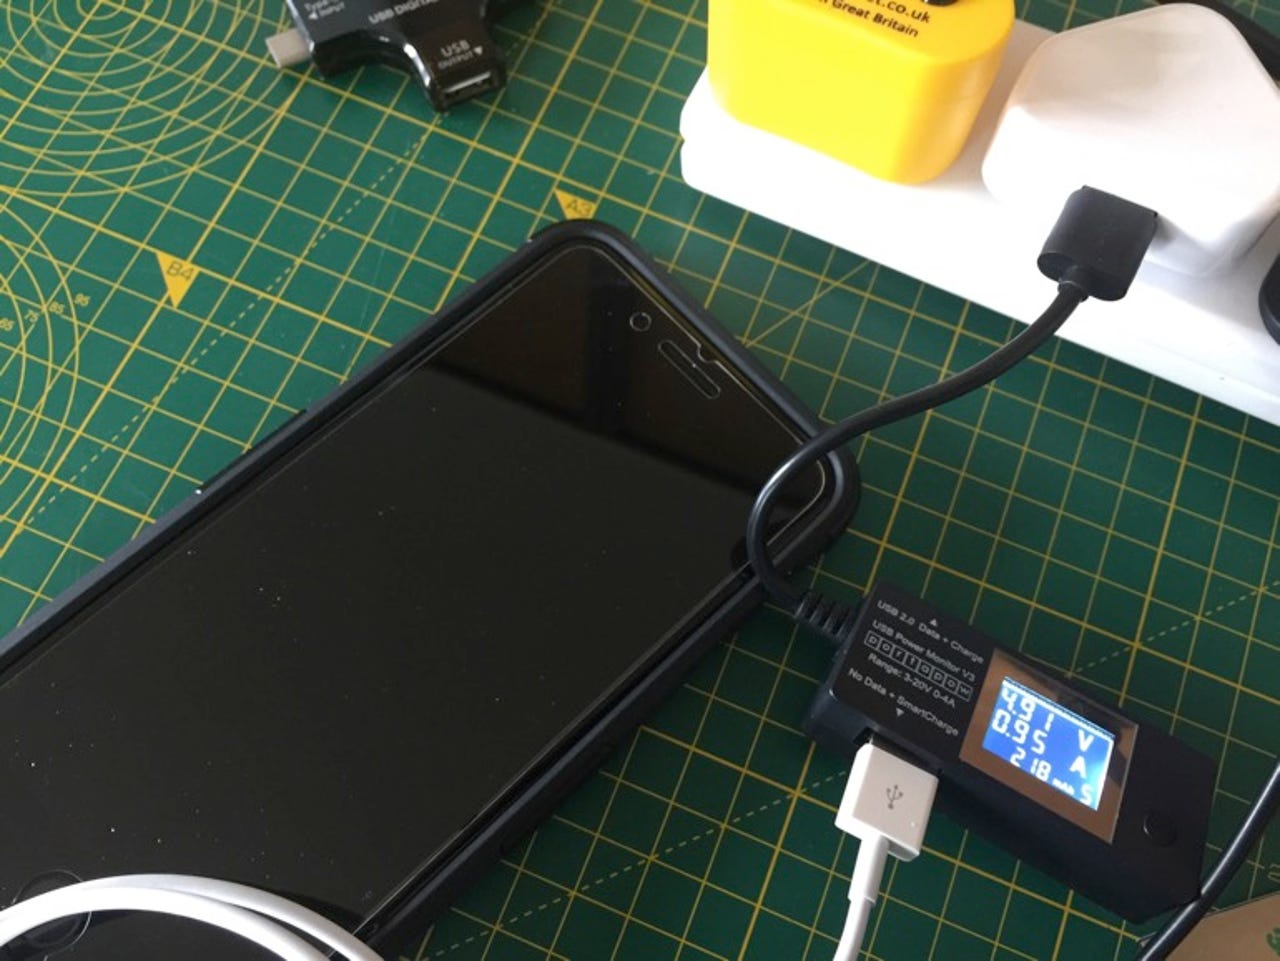 Charging using Apple supplied USB charger